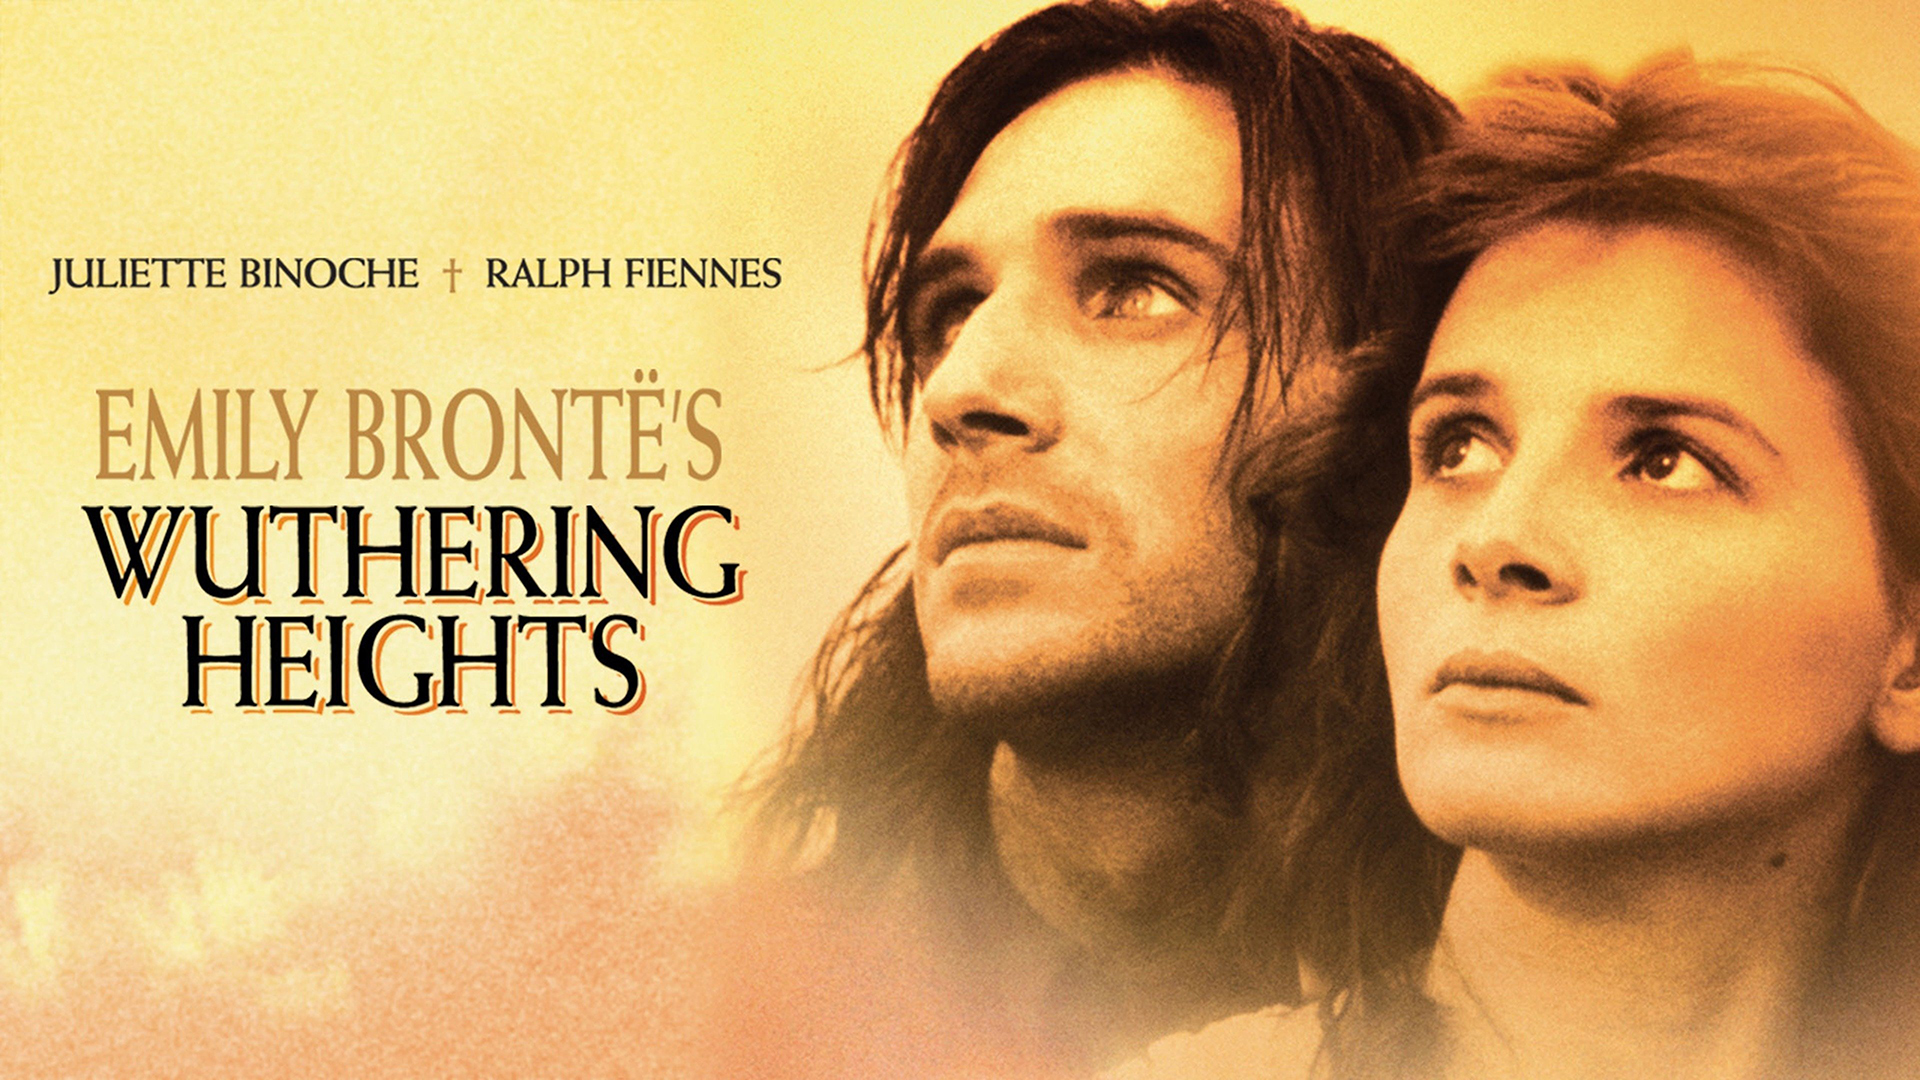 Emily Bronte’s Wuthering Heights